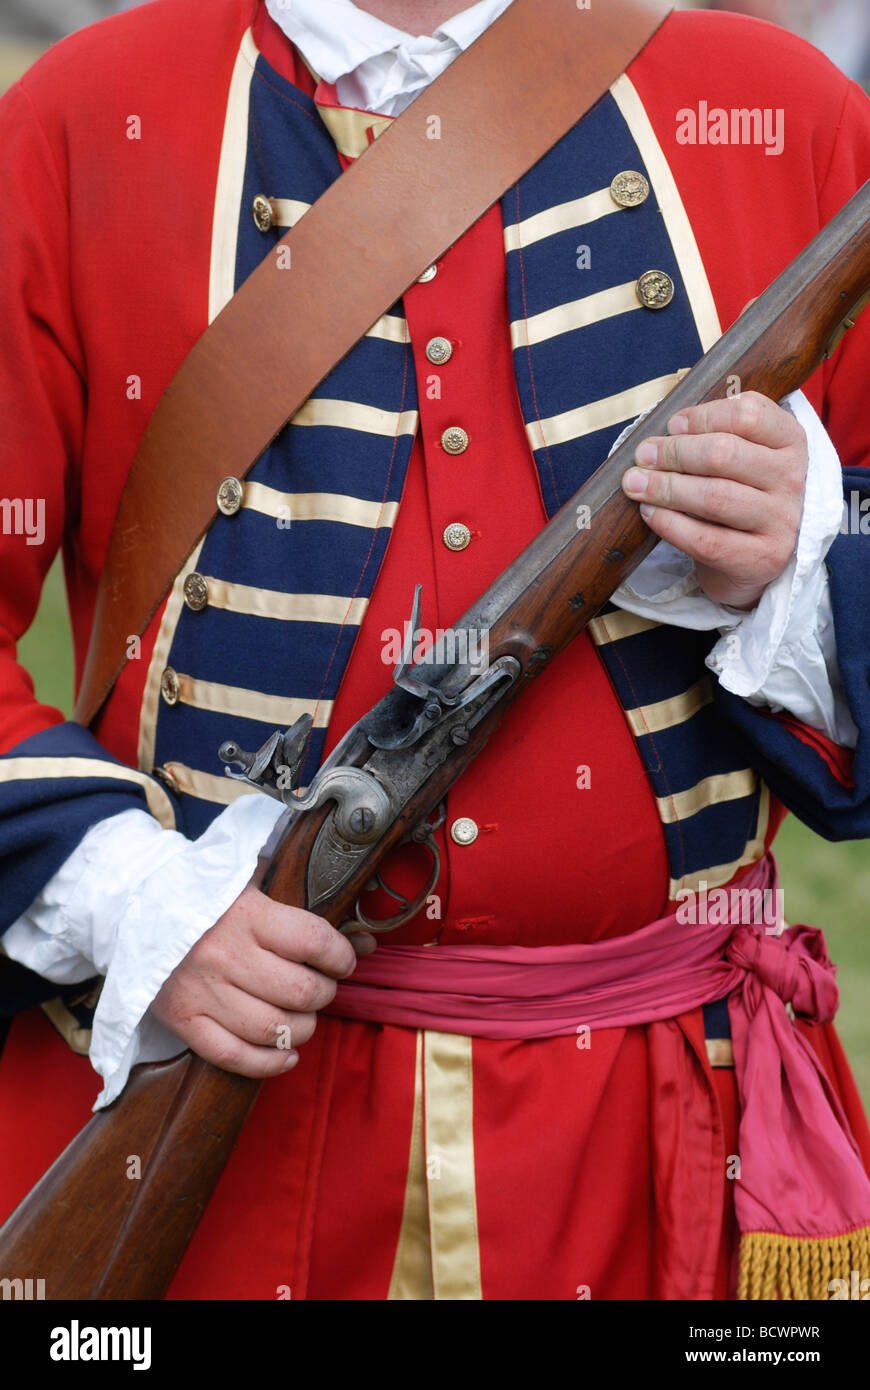 Re enactor dressed as a 16th century infantryman in the British Army with flintlock musket Stock Photo